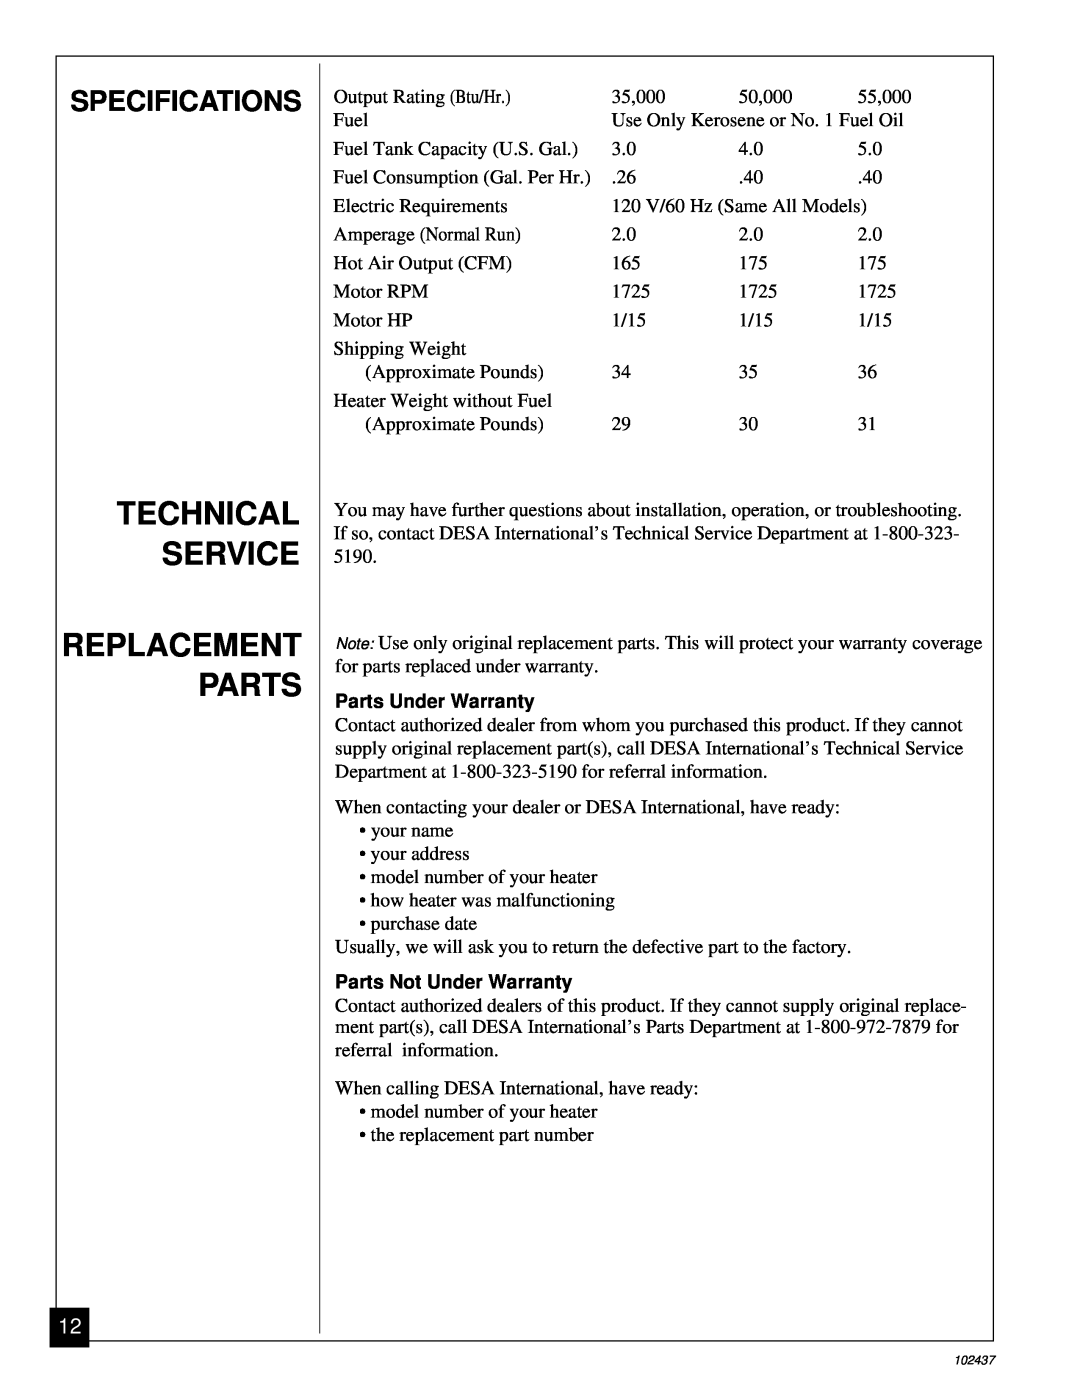 Desa PORTABLE FORCED AIR HEATERS owner manual Technical Service, Replacement Parts, Specifications, Parts Under Warranty 